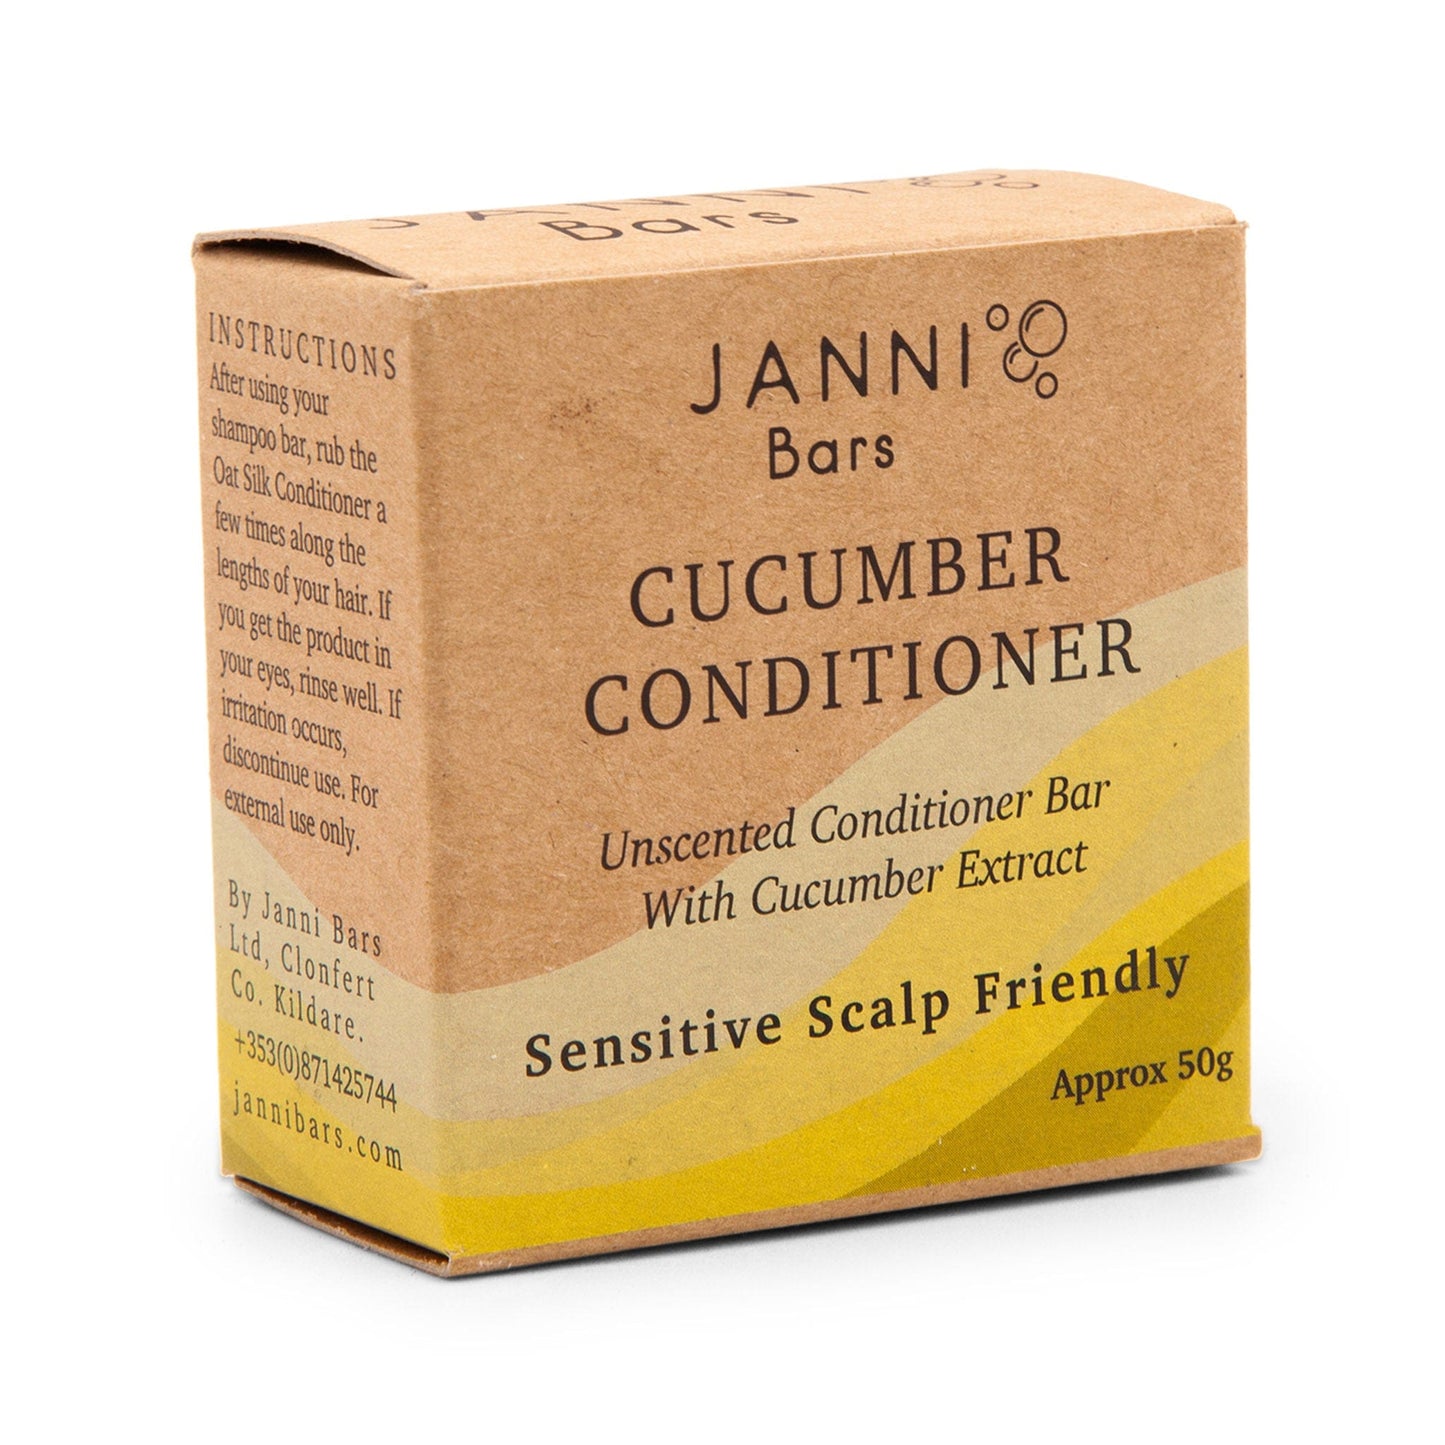 Janni Bars Conditioner Unscented Conditioner Bar with Cucumber & Shea Butter for Sensitive Scalps or Dry Hair - Janni Bars